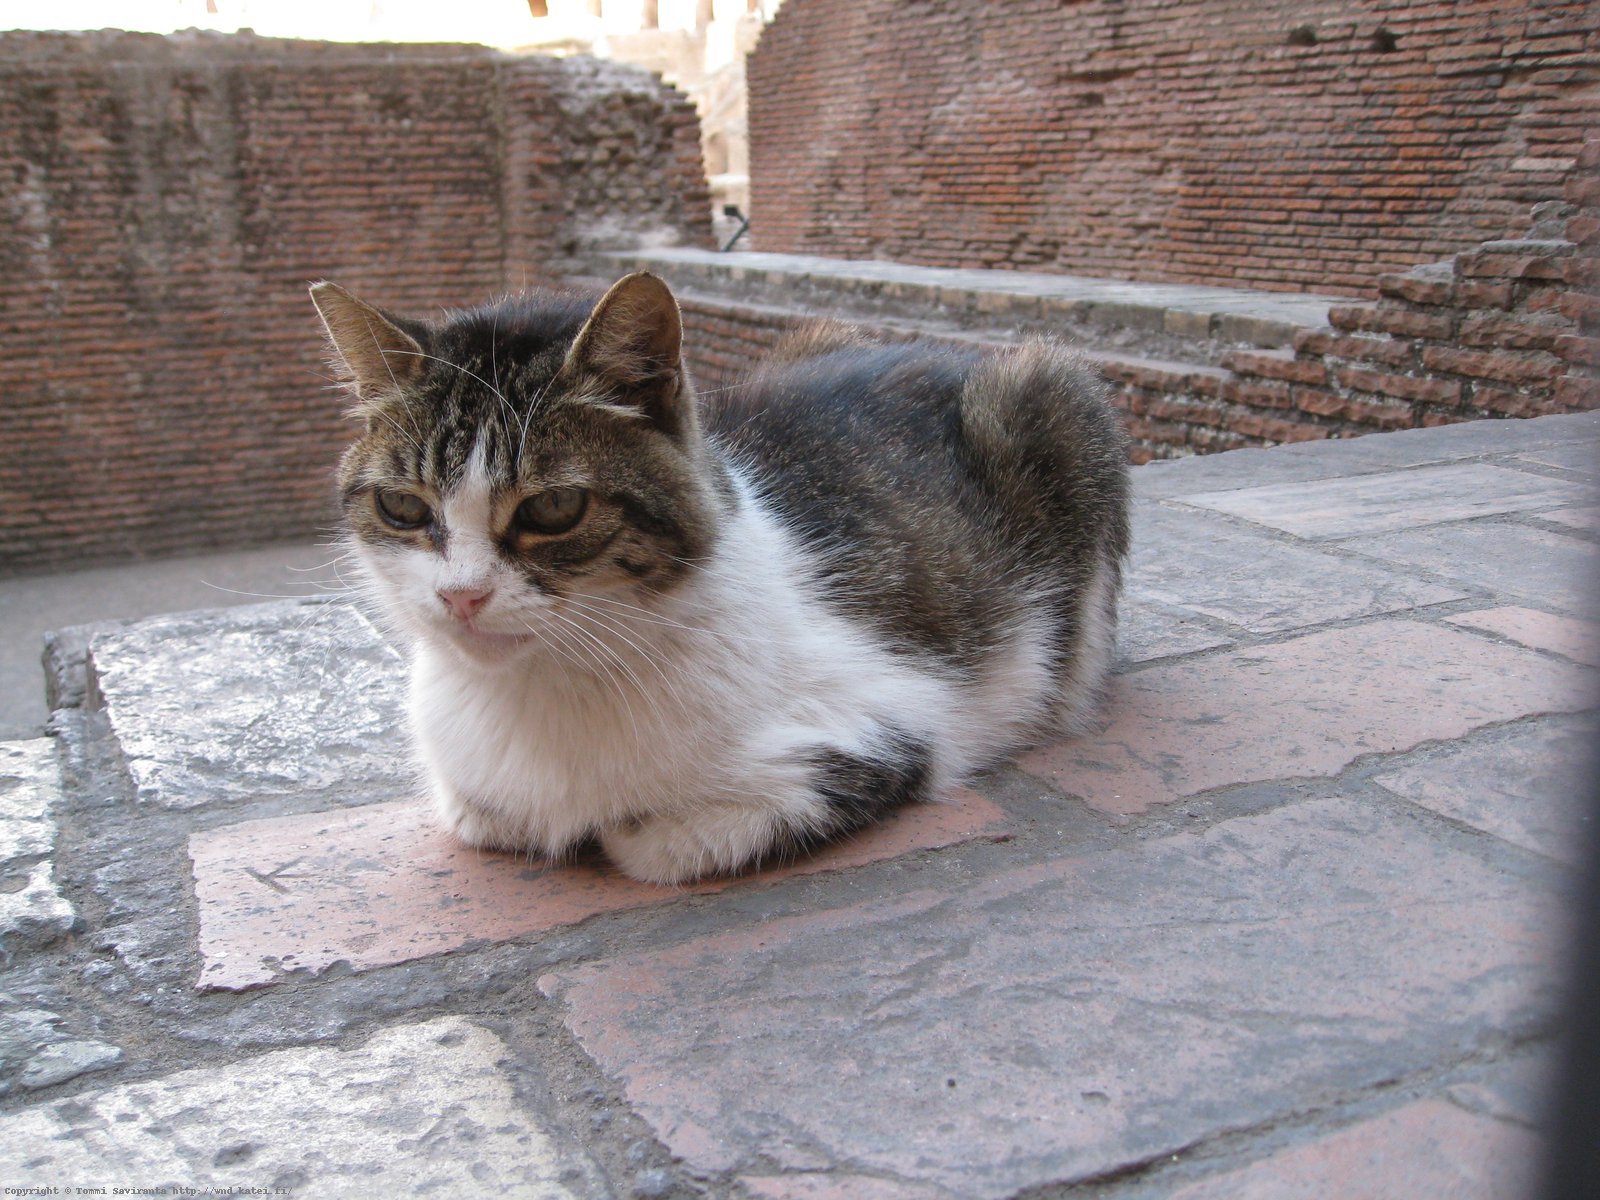 Day #2: Ferocious beast at Colosseum